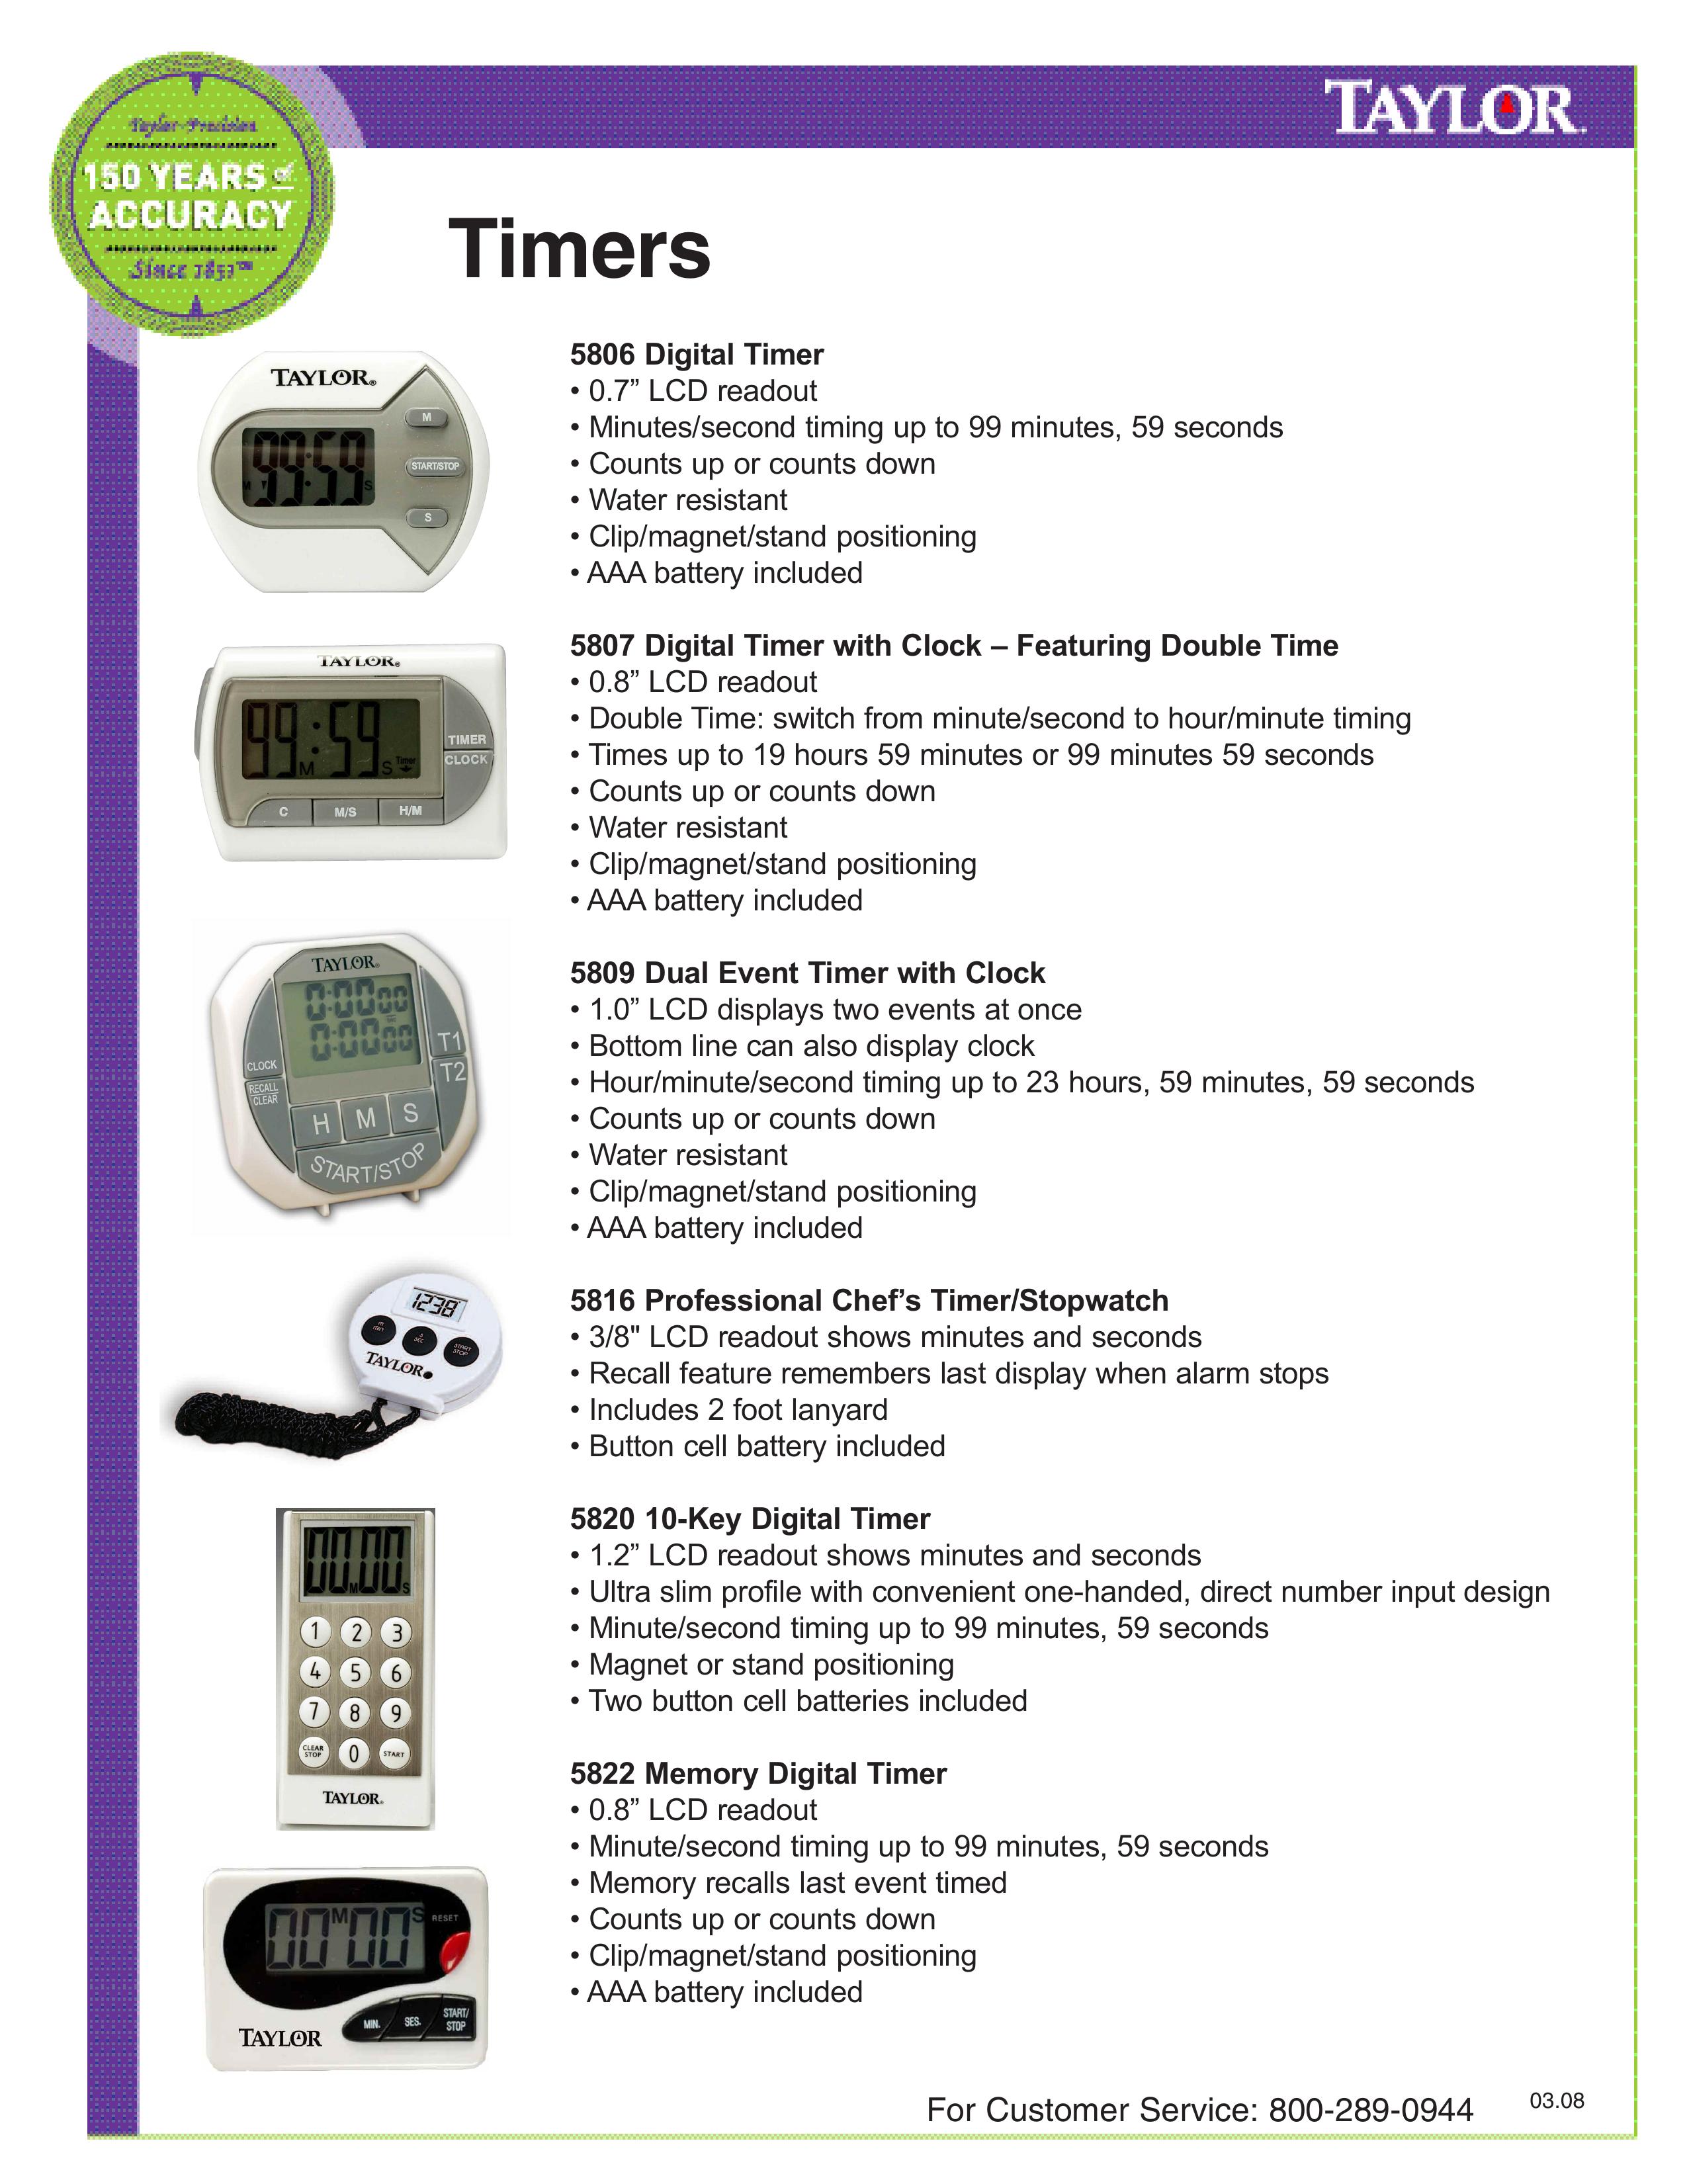 Taylor 5807 Outdoor Timer User Manual